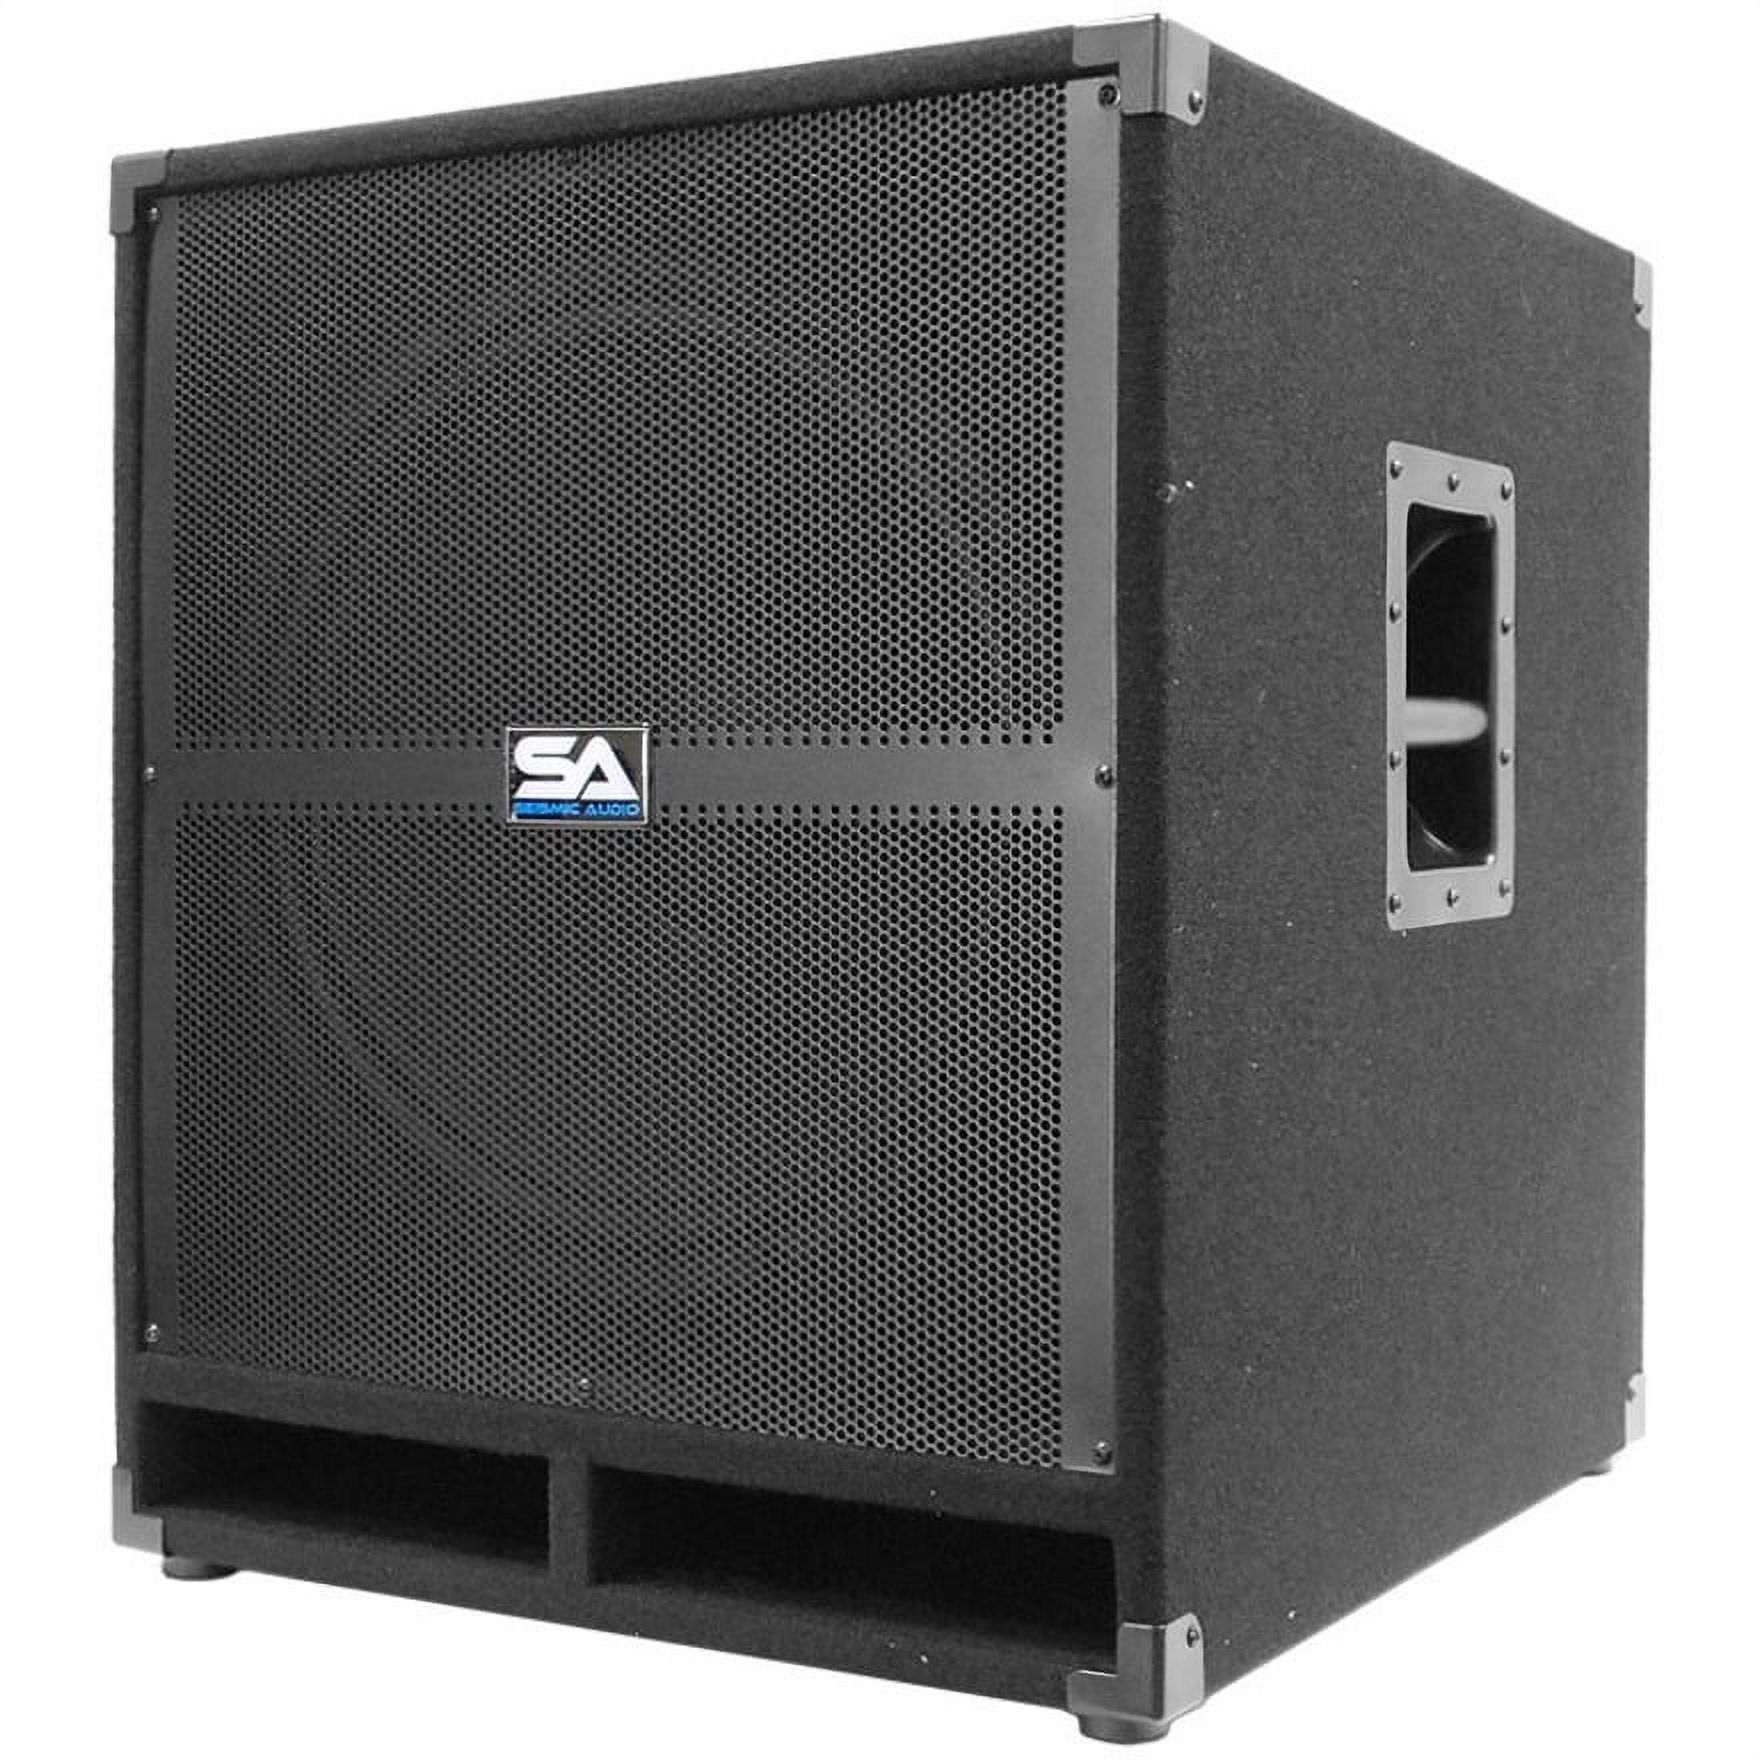 Seismic Audio Tremor 18 Subwoofer System, 500 W RMS, Black - image 1 of 6